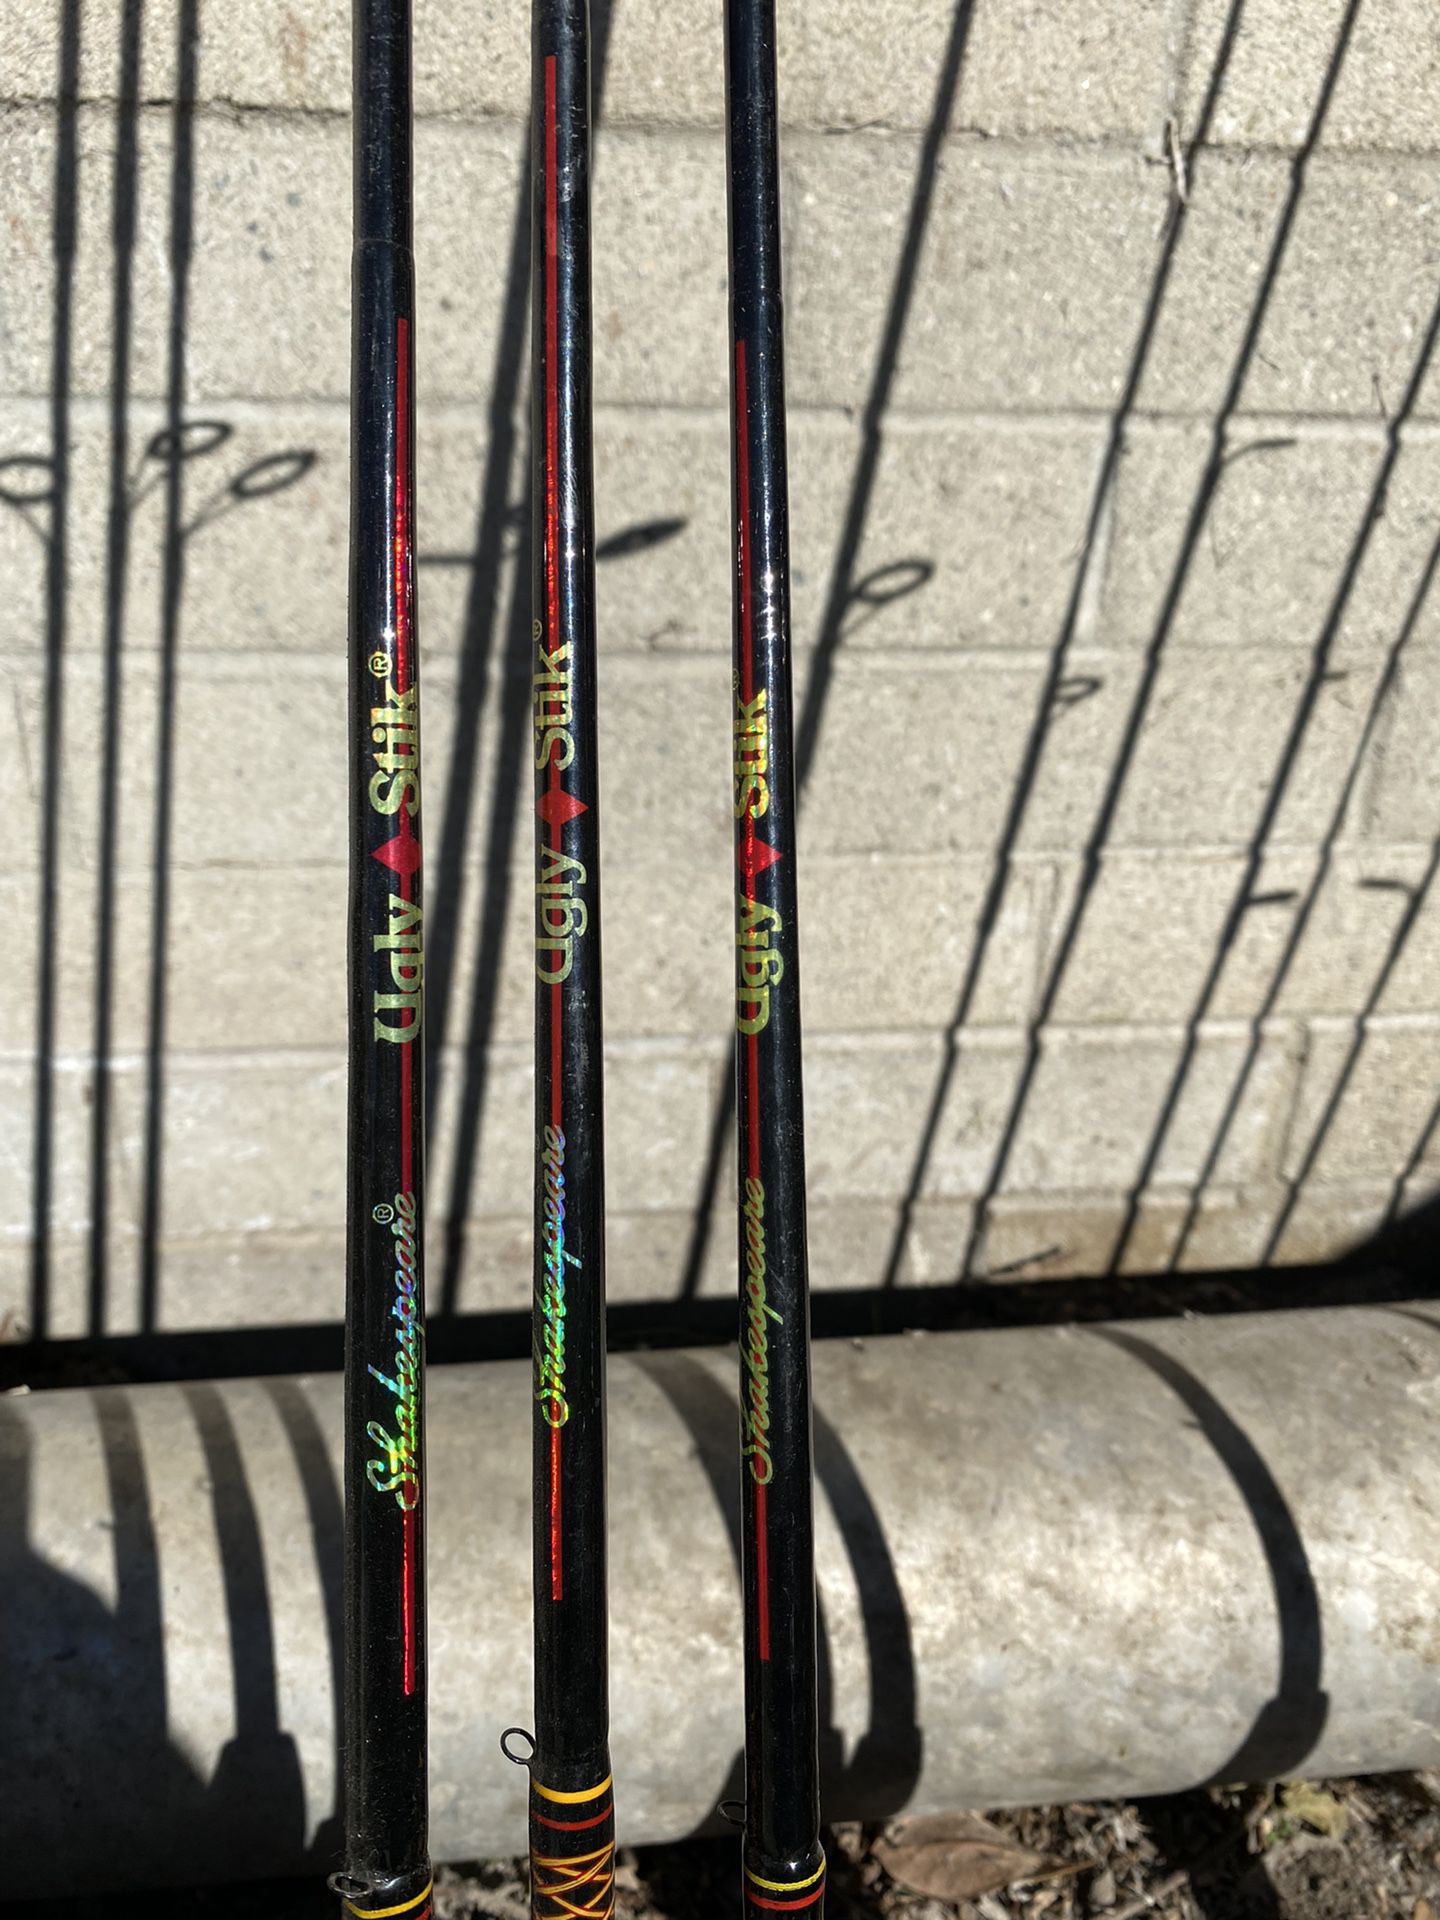 Fishing Rods for Sale in South Gate, CA - OfferUp